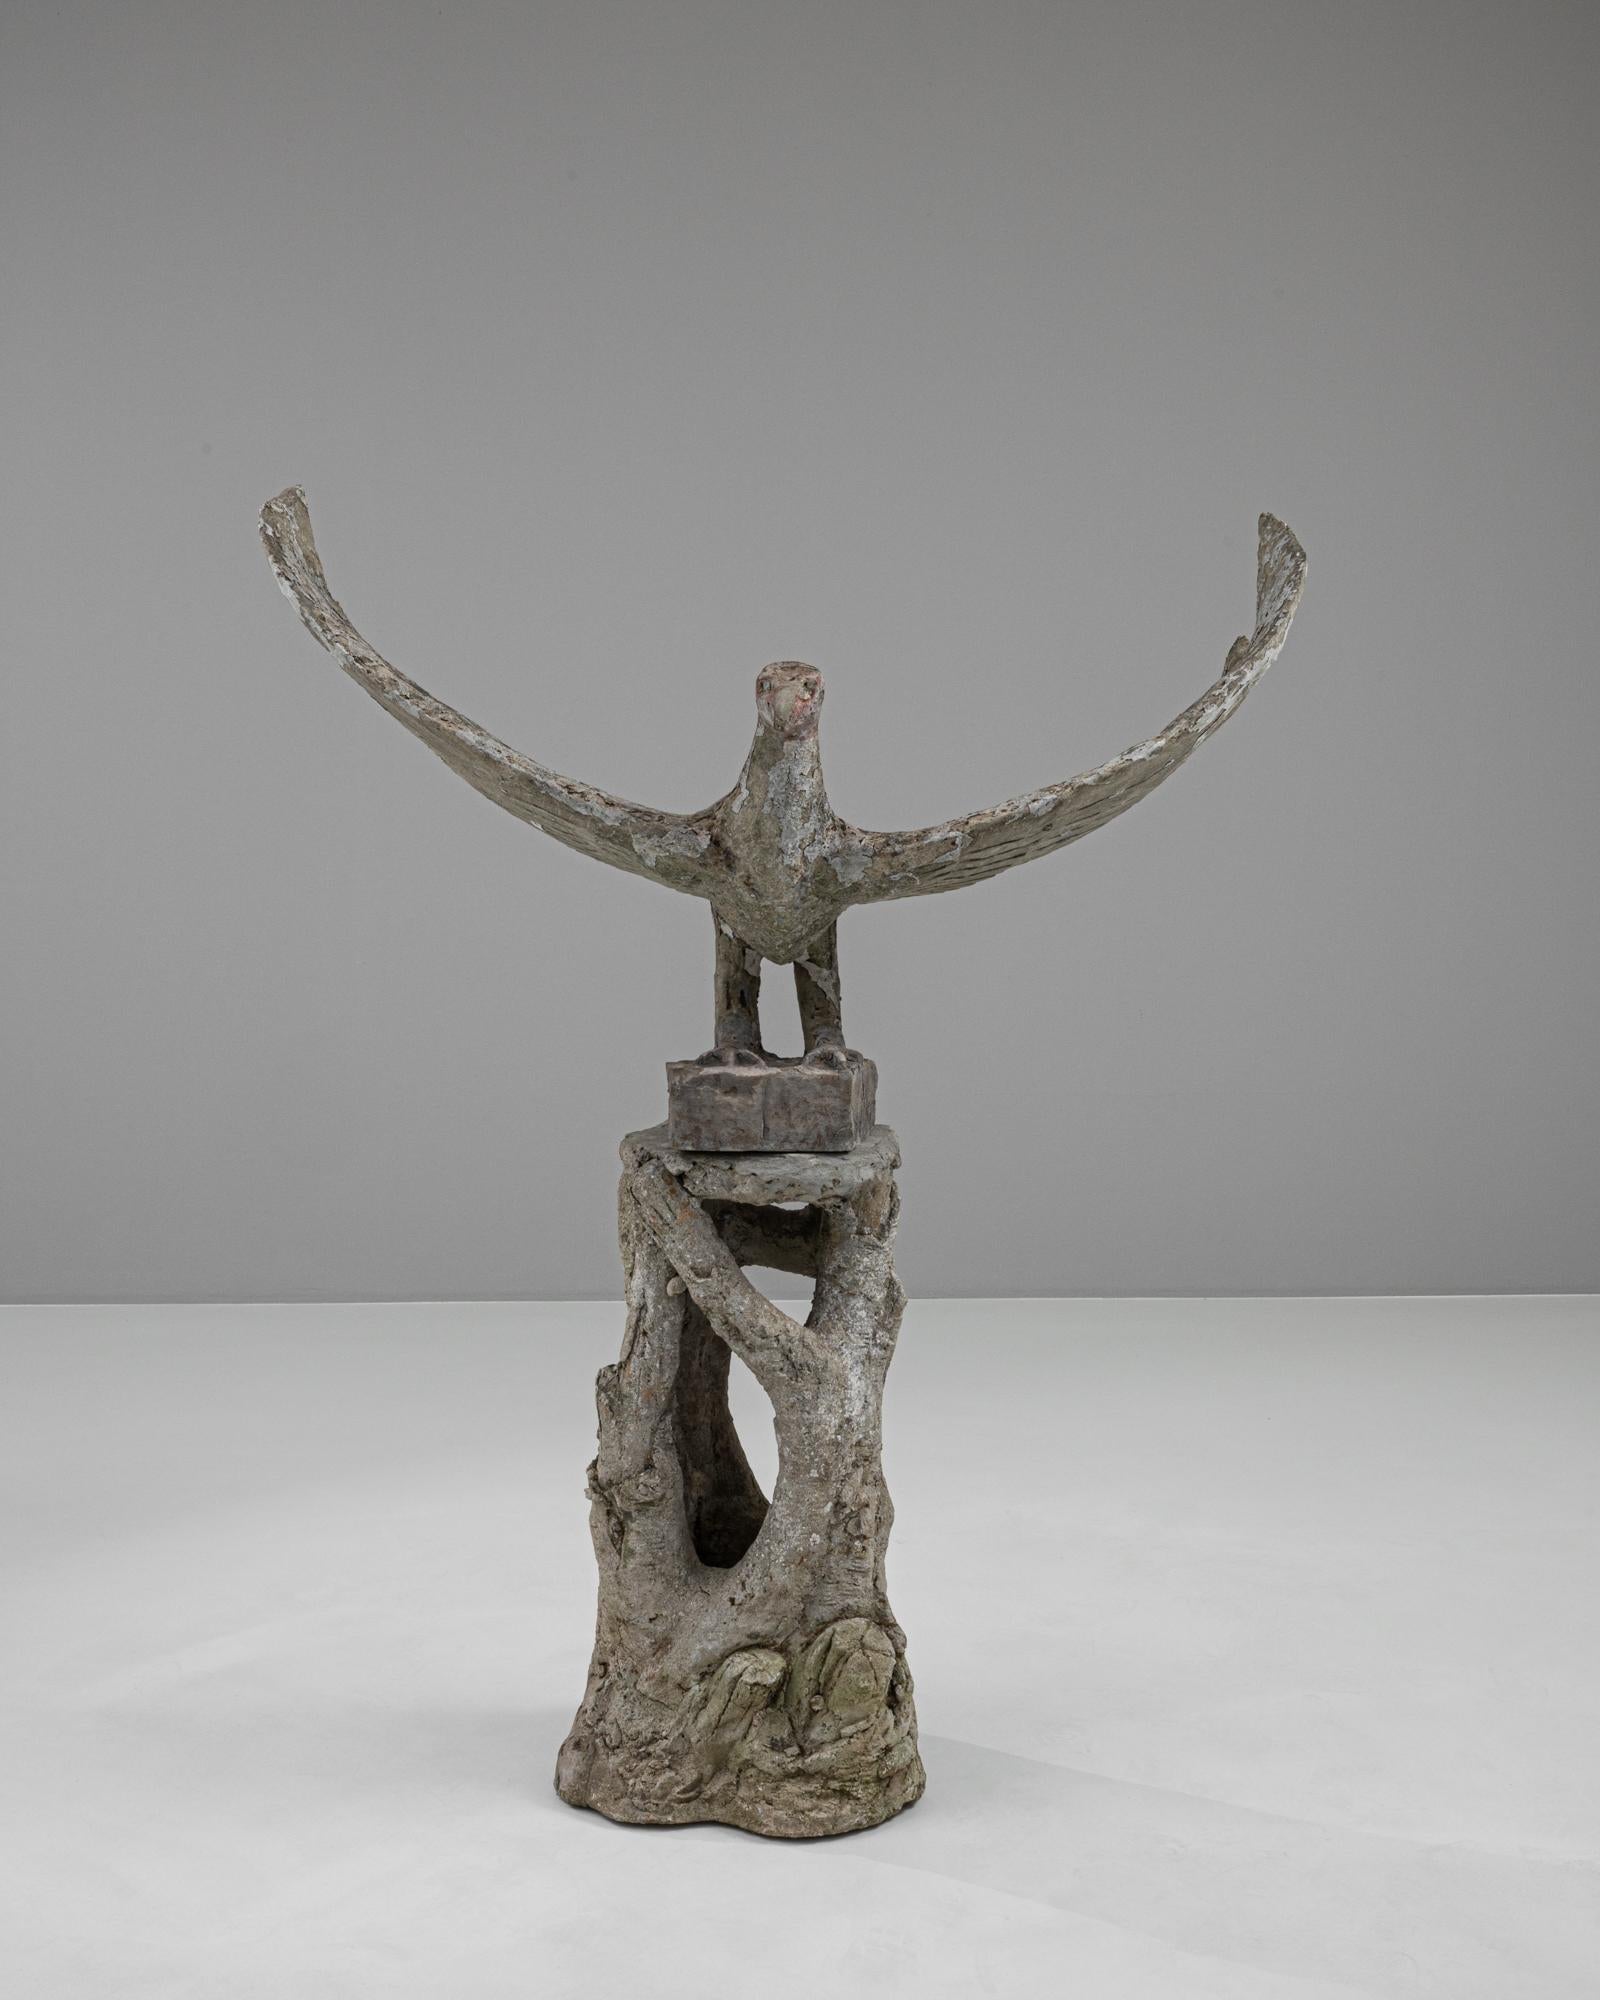 This striking 20th Century French Concrete Sculpture captures the raw, emotive power of natural forms, melded with abstract artistry. Shaped to resemble an bird in mid-flight, this piece embodies a dynamic sense of movement and grace. Perched atop a